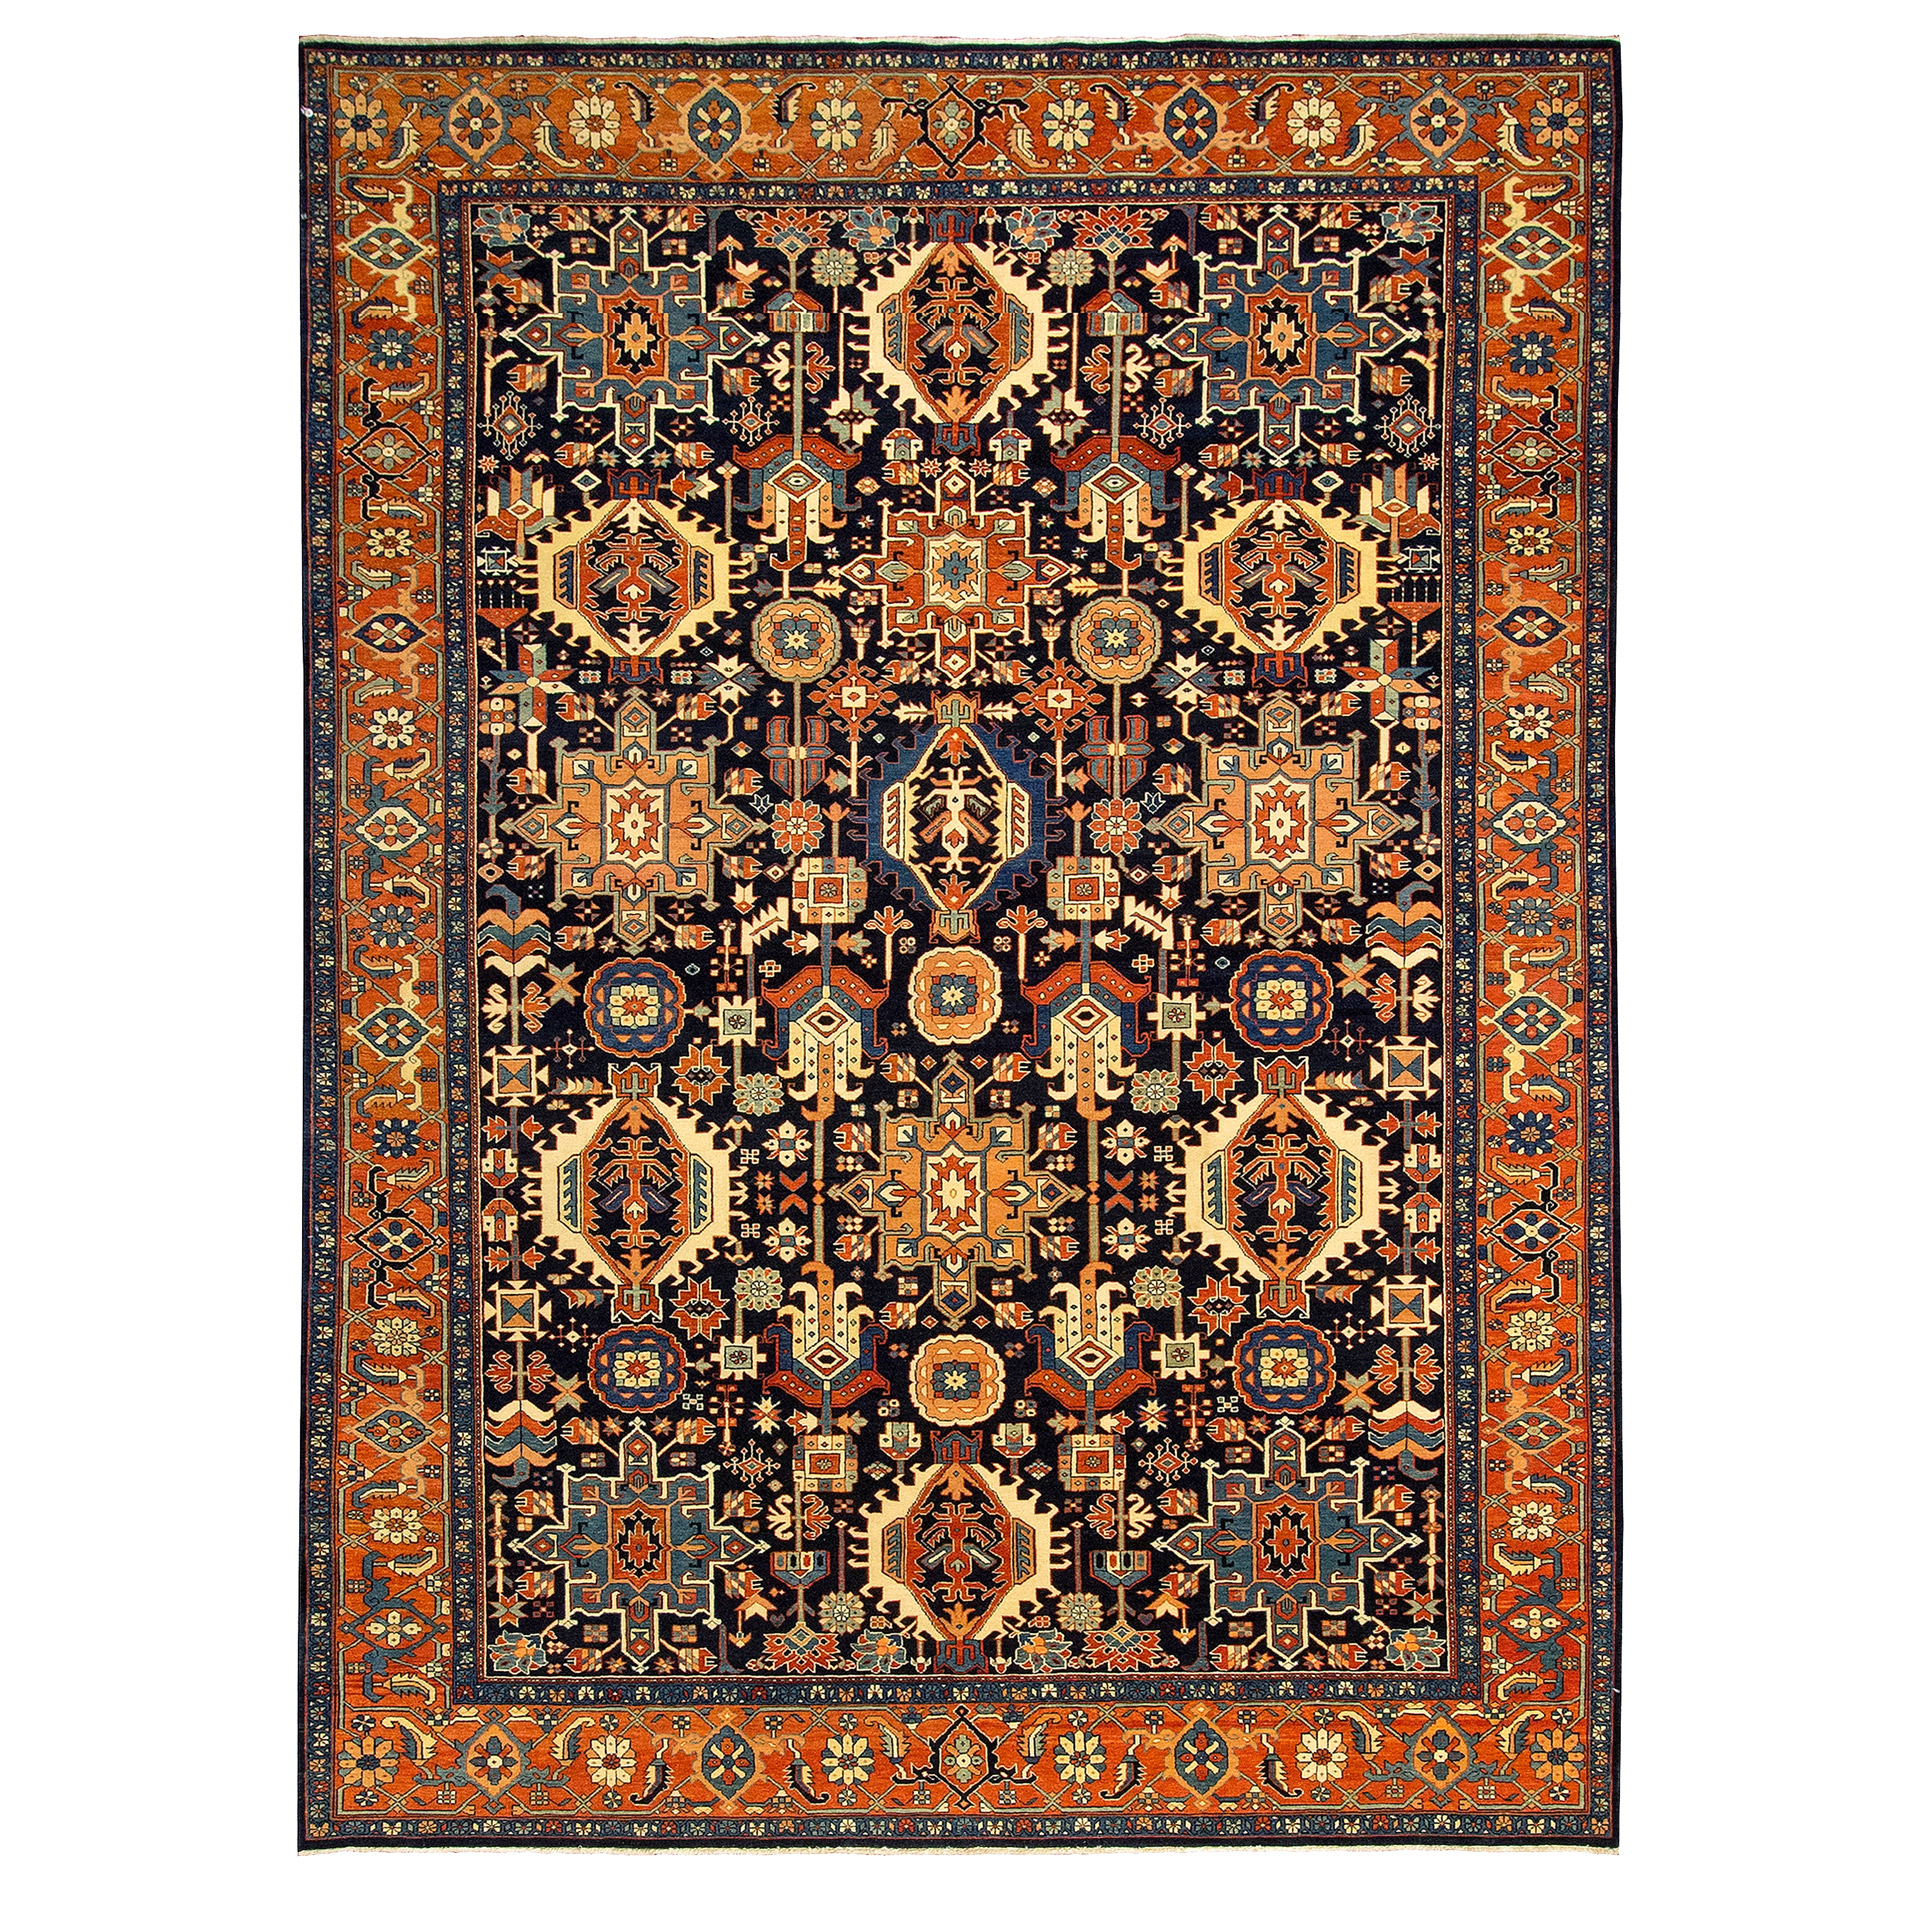 New, hand woven Turkish carpet with a Persian Karaja design of medallions on a navy blue field. Douglas Stock Gallery Oriental rugs Boston,MA area South Natick, Wellesley, Newton, Brookline,MA area antique and new hand woven Oriental rugs and Persian carpets